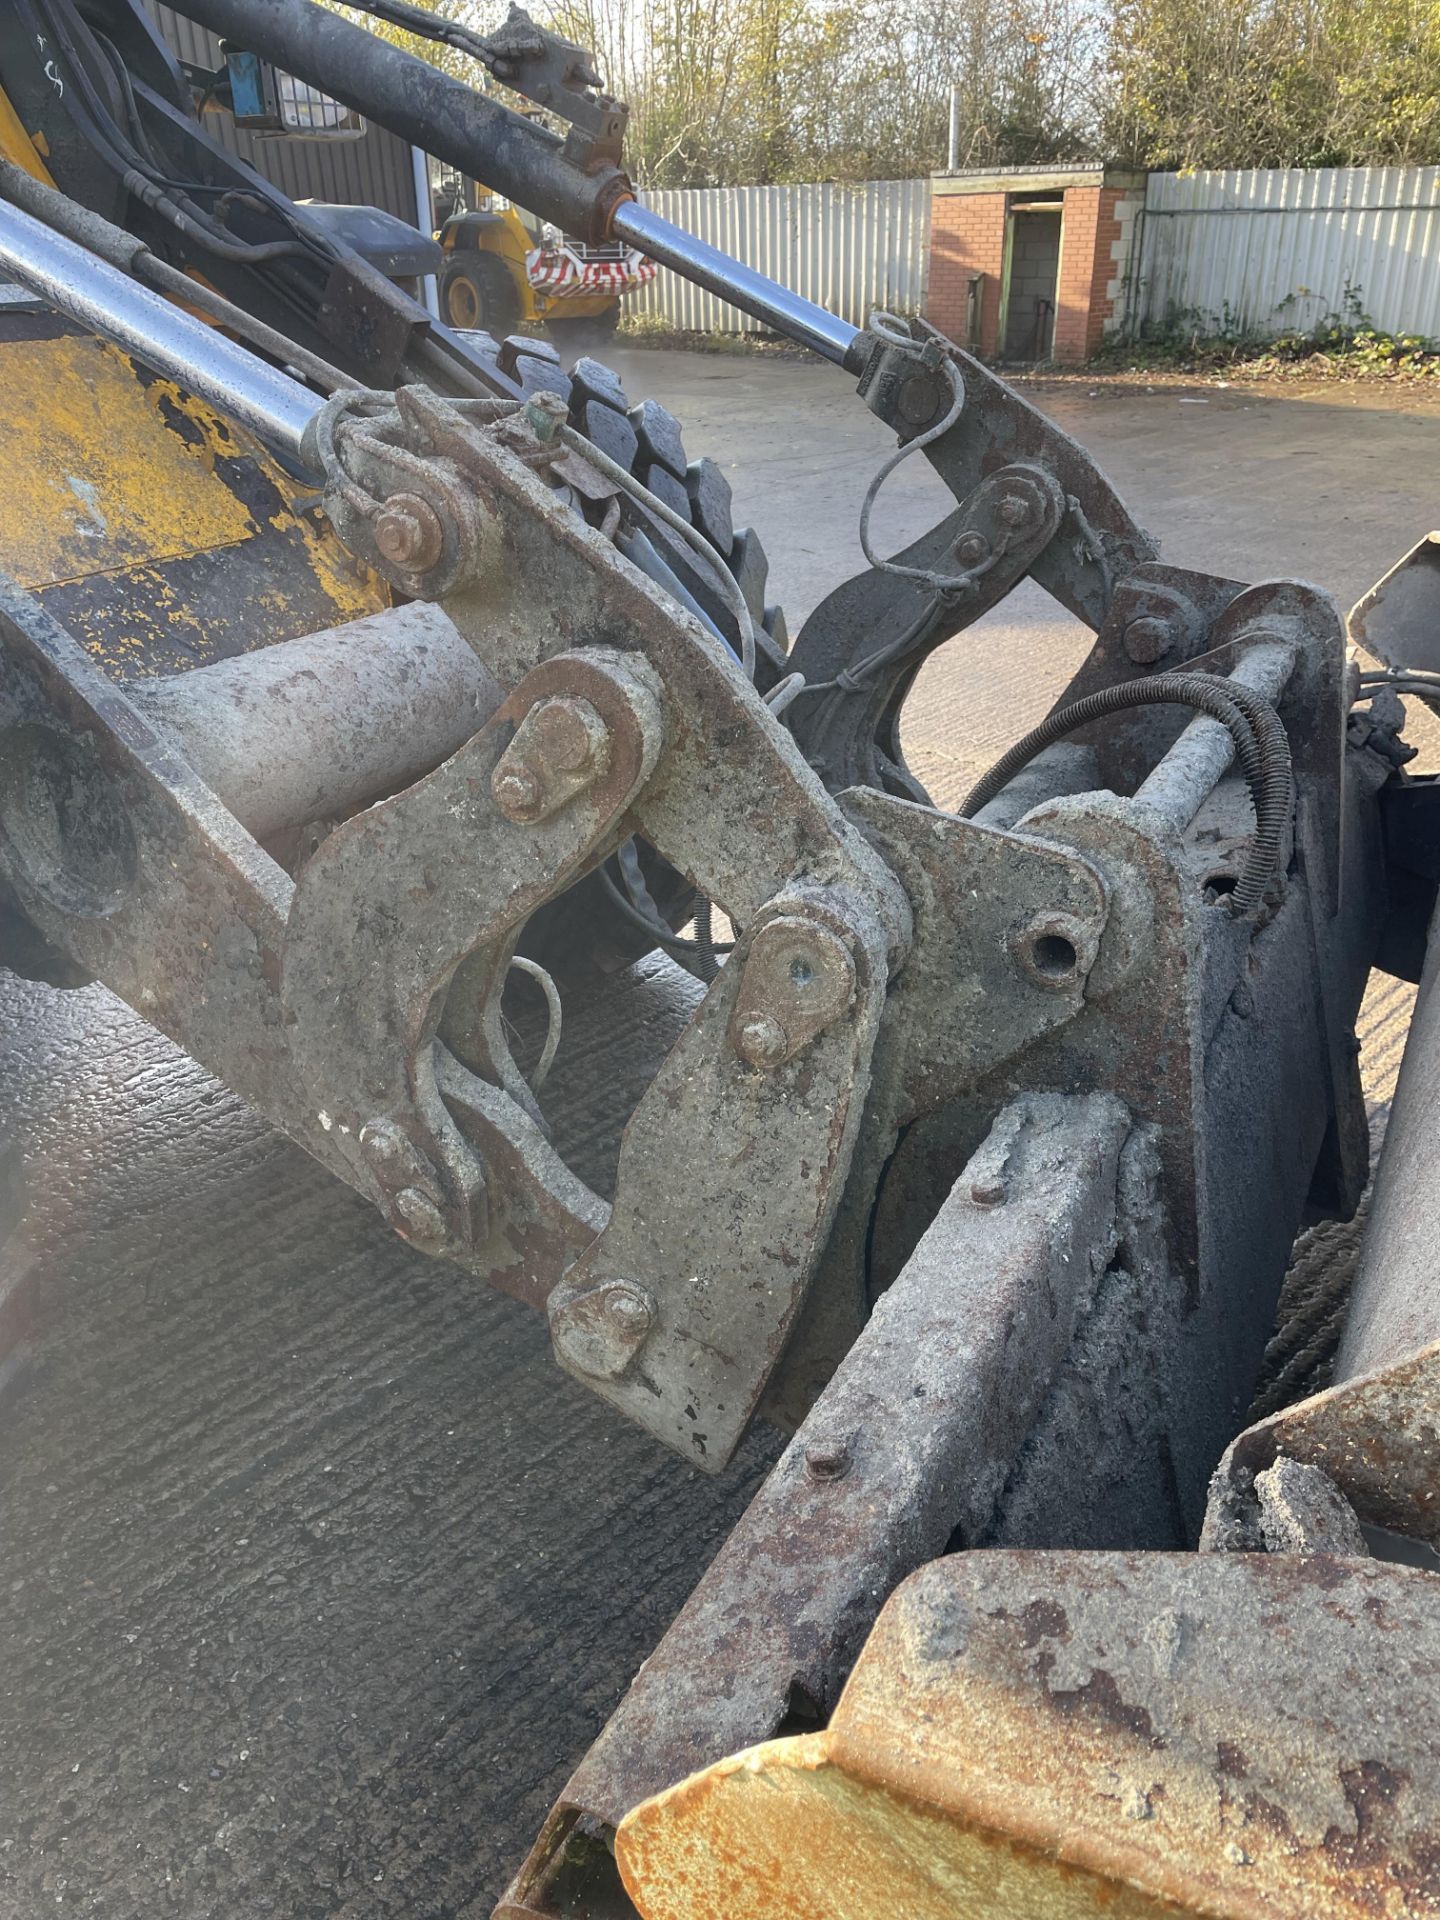 JCB, Wastemaster 427 S5, wheel loader, PIN: JCB4A5A9VK2679908 (2019), Last known Hours 3775.8, - Image 10 of 24